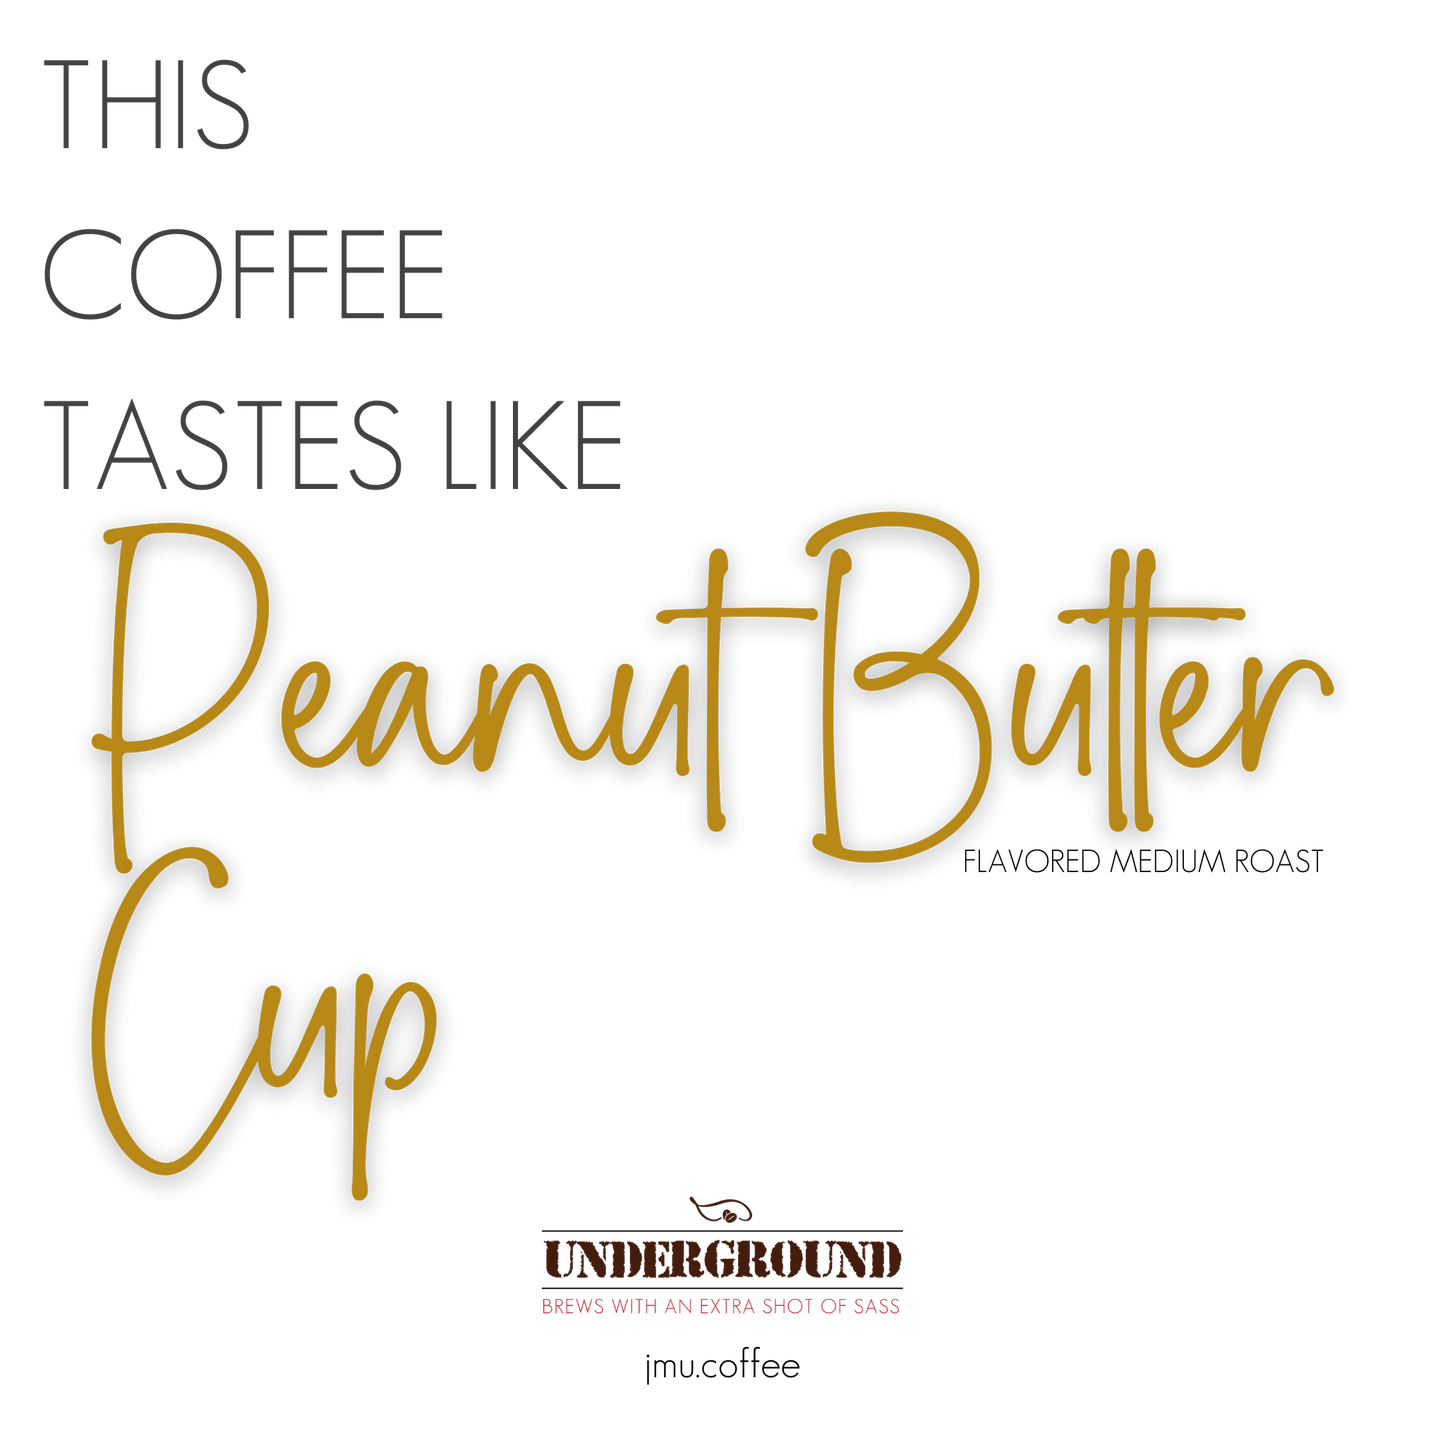 Peanut Butter Cup  Flavored Coffee